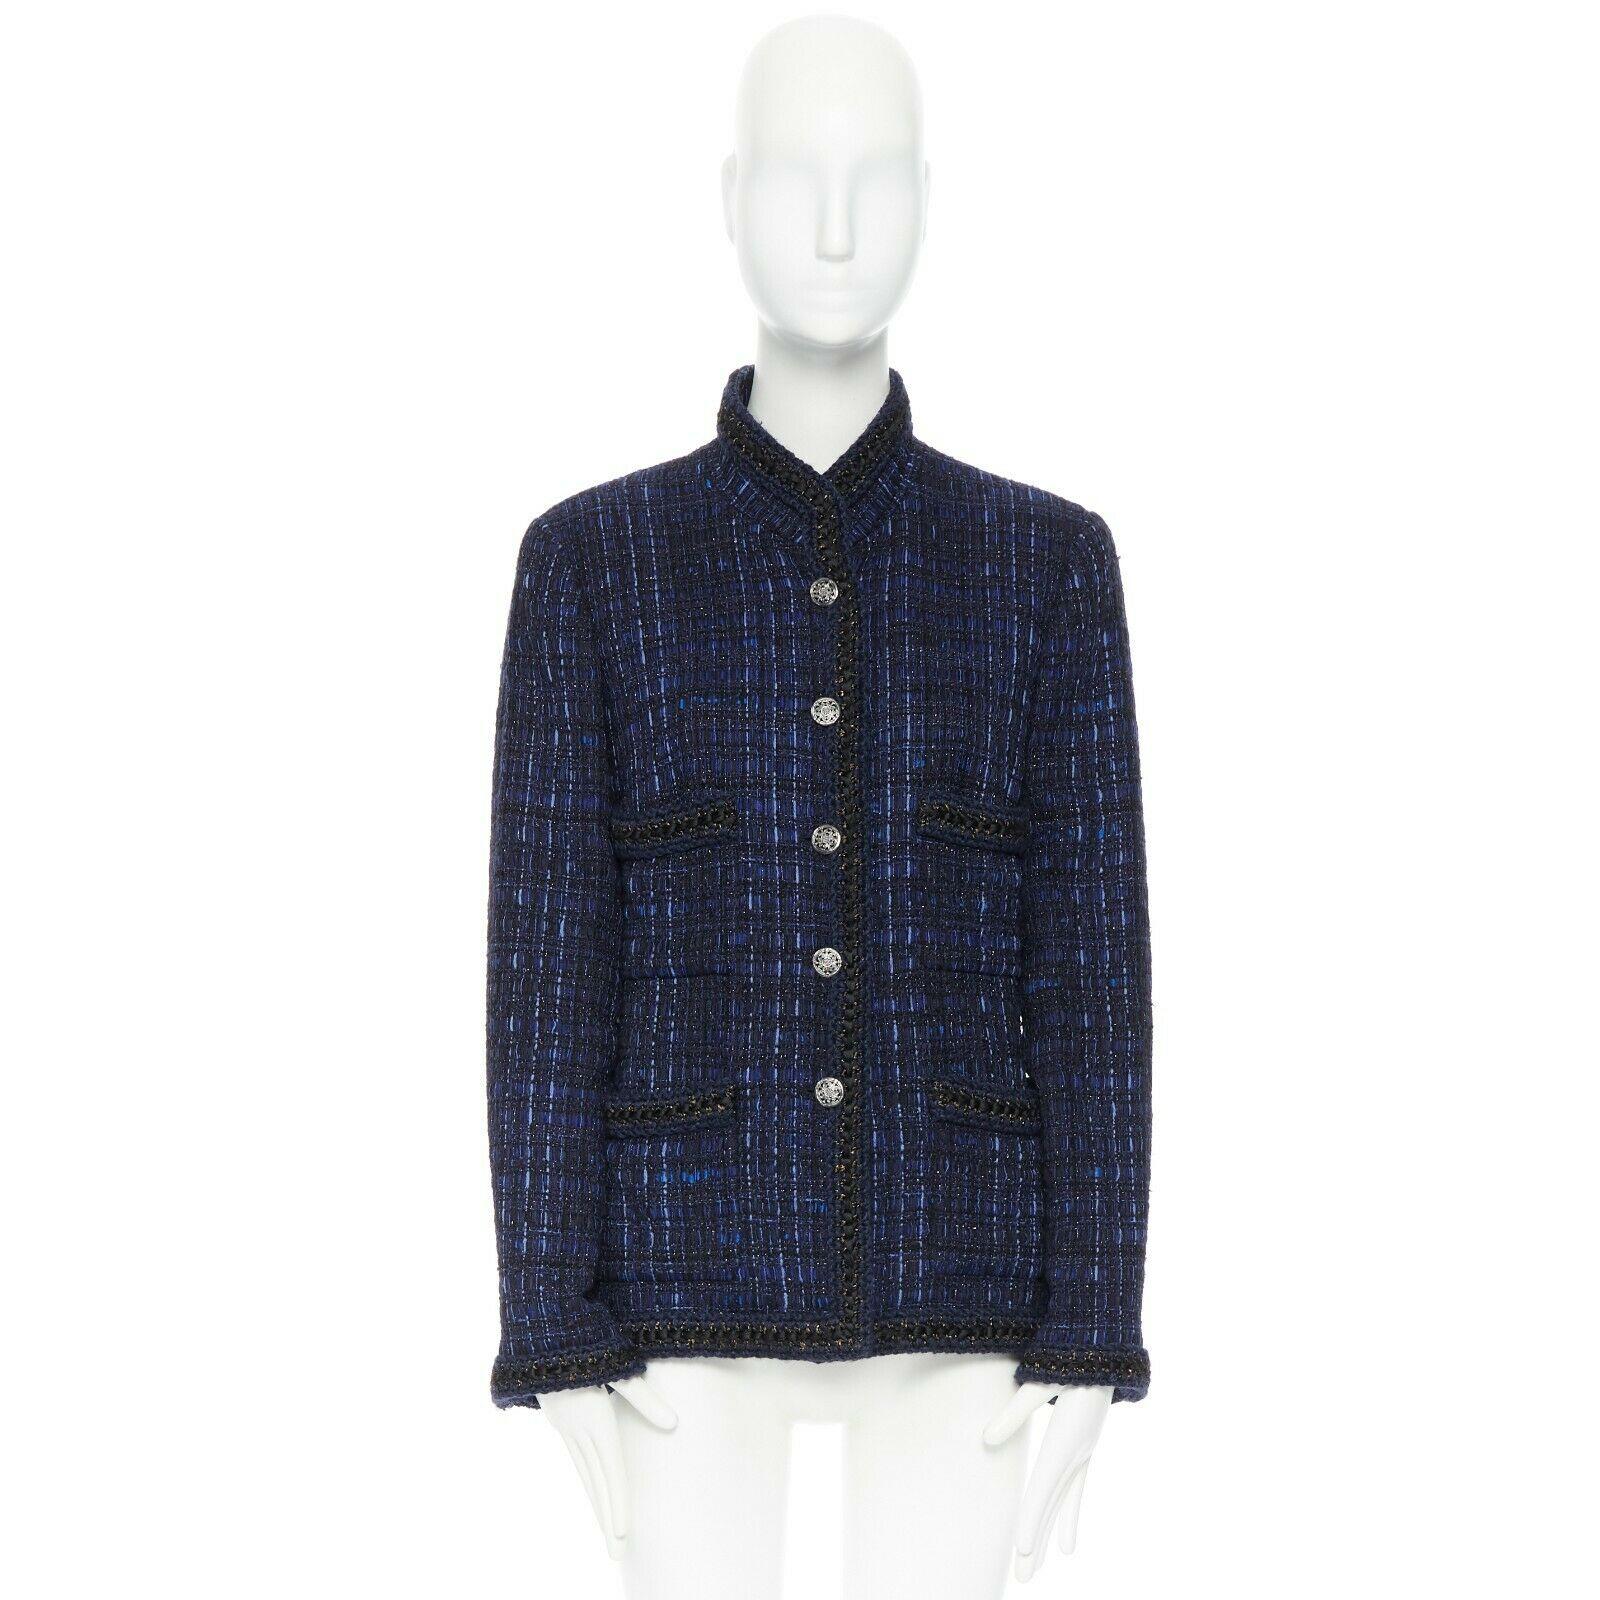 CHANEL 10A Paris-Shanghai blue fantasy tweed crochet trim 4 pockets jacket FR44
Brand: CHANEL
Designer: Karl Lagerfeld
Collection: Pre-Fall 2010, Paris-Shanghai
As seen on: G-Dragon
Model Name / Style: Tweed Jacket
Material: Cotton and silk
Color: